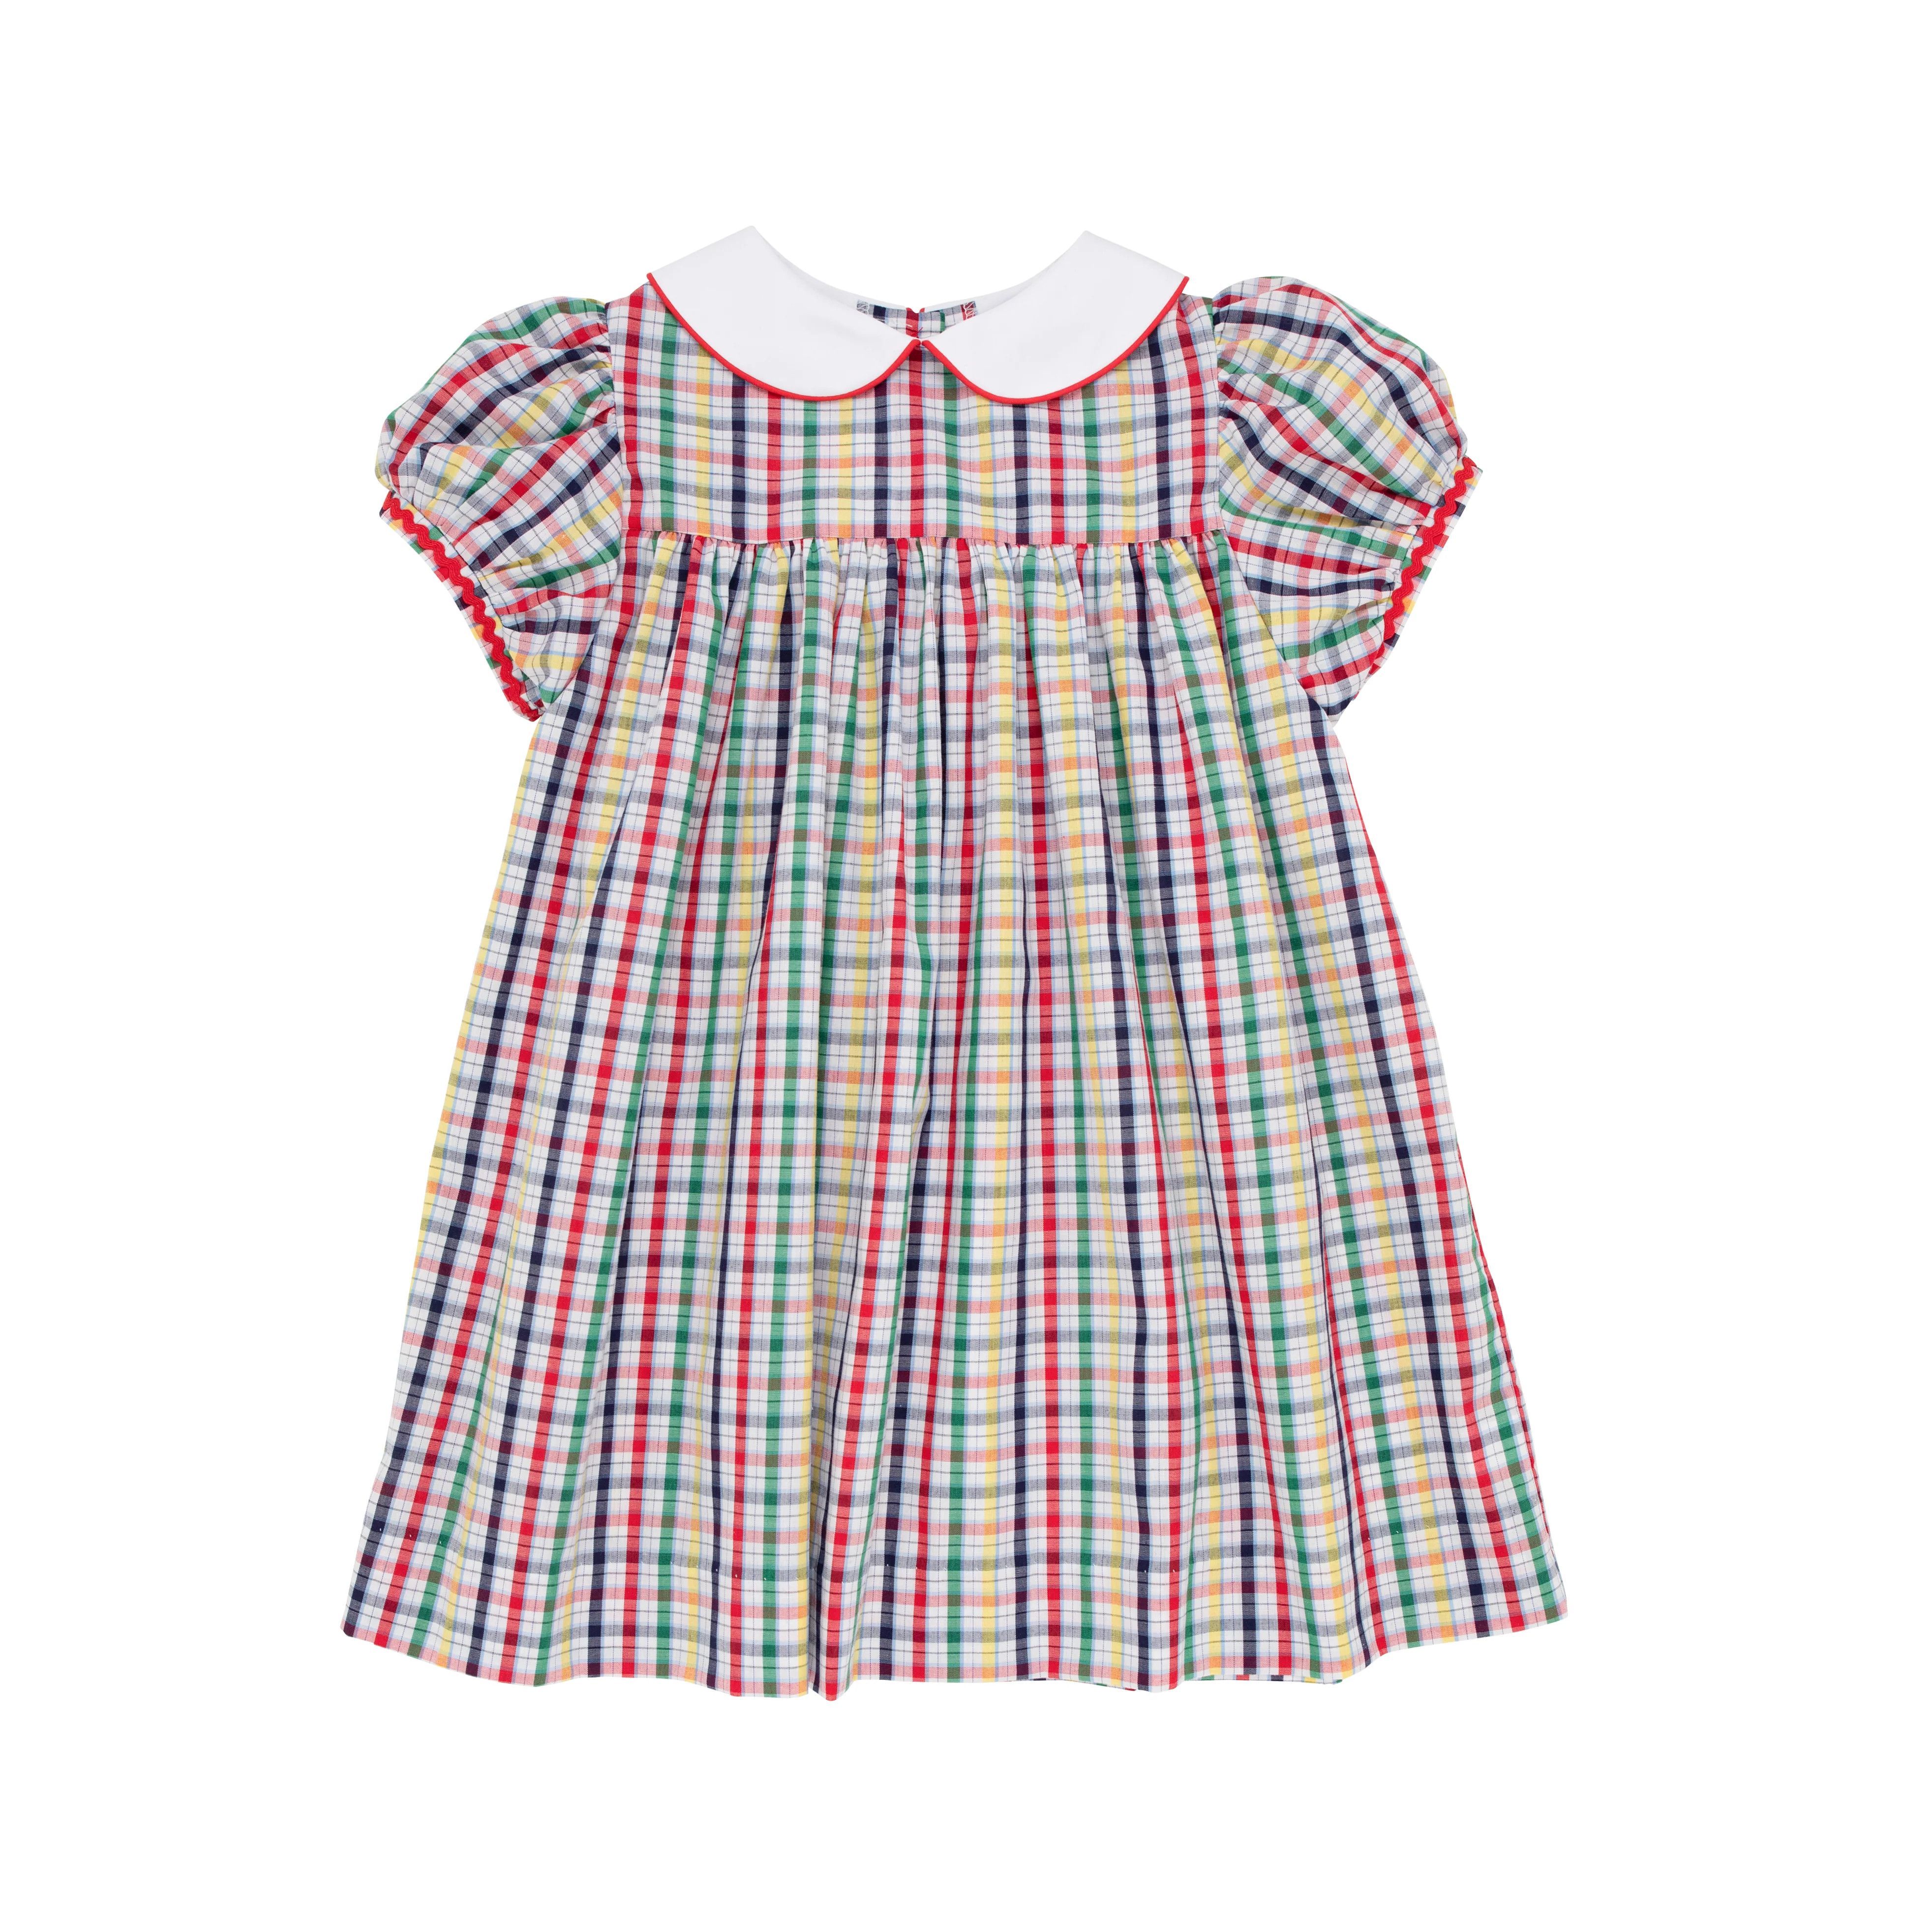 Mary Dal Dress - Potomac Plaid with Worth Avenue White & Richmond Red | The Beaufort Bonnet Company